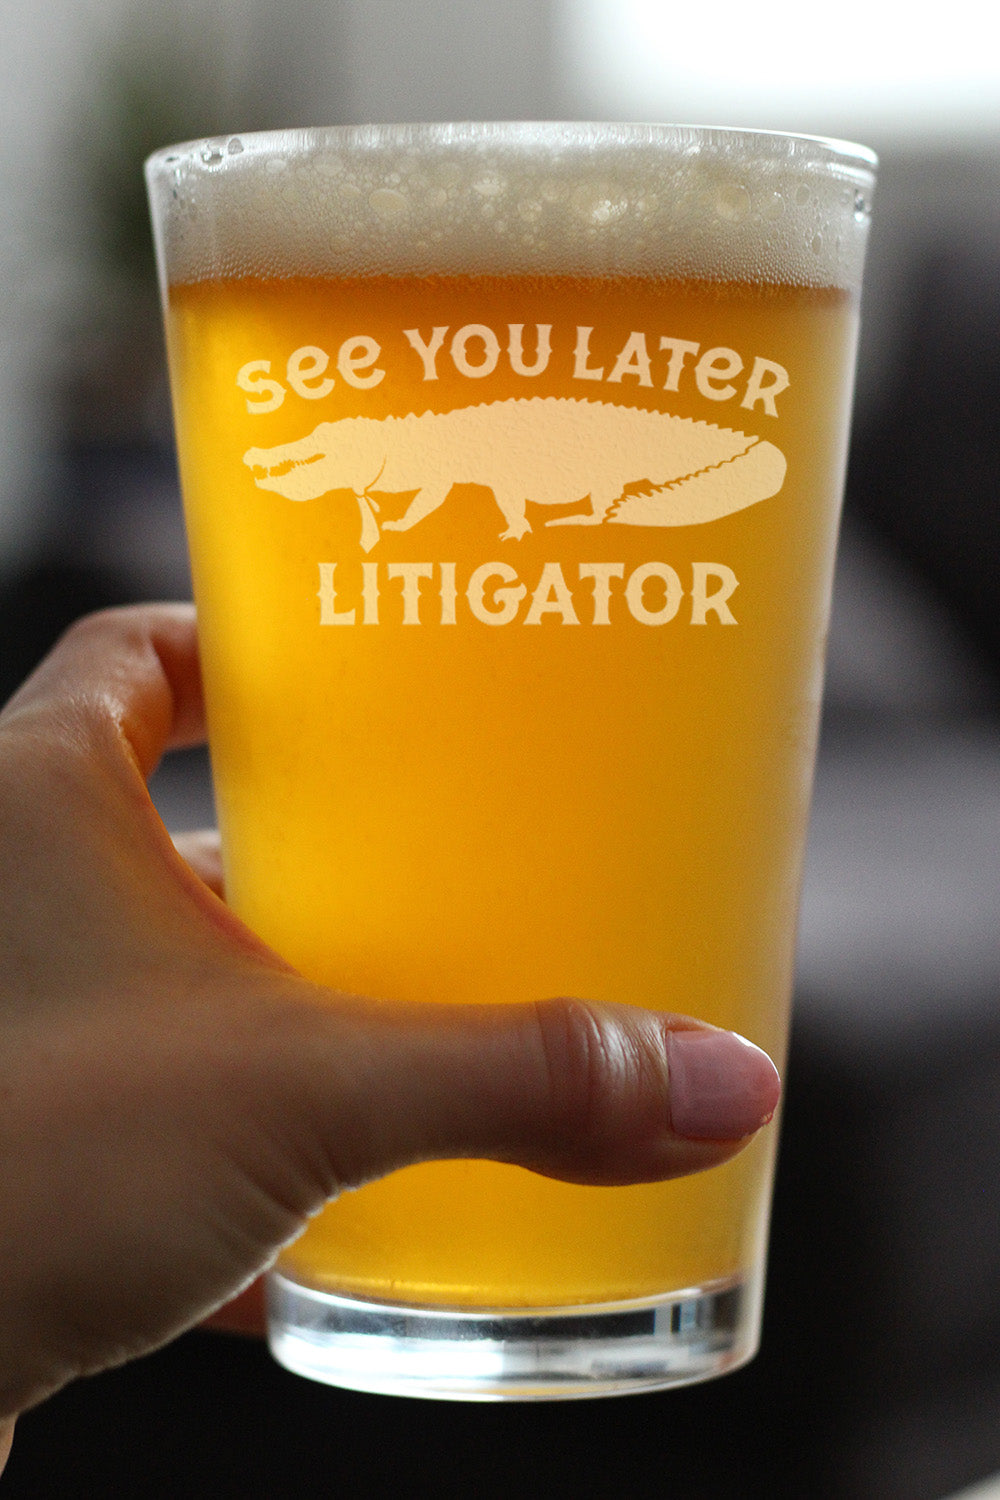 See You Later Litigator - Pint Glass for Beer - Funny Lawyer Gifts for Law School Graduates - 16 oz Glass